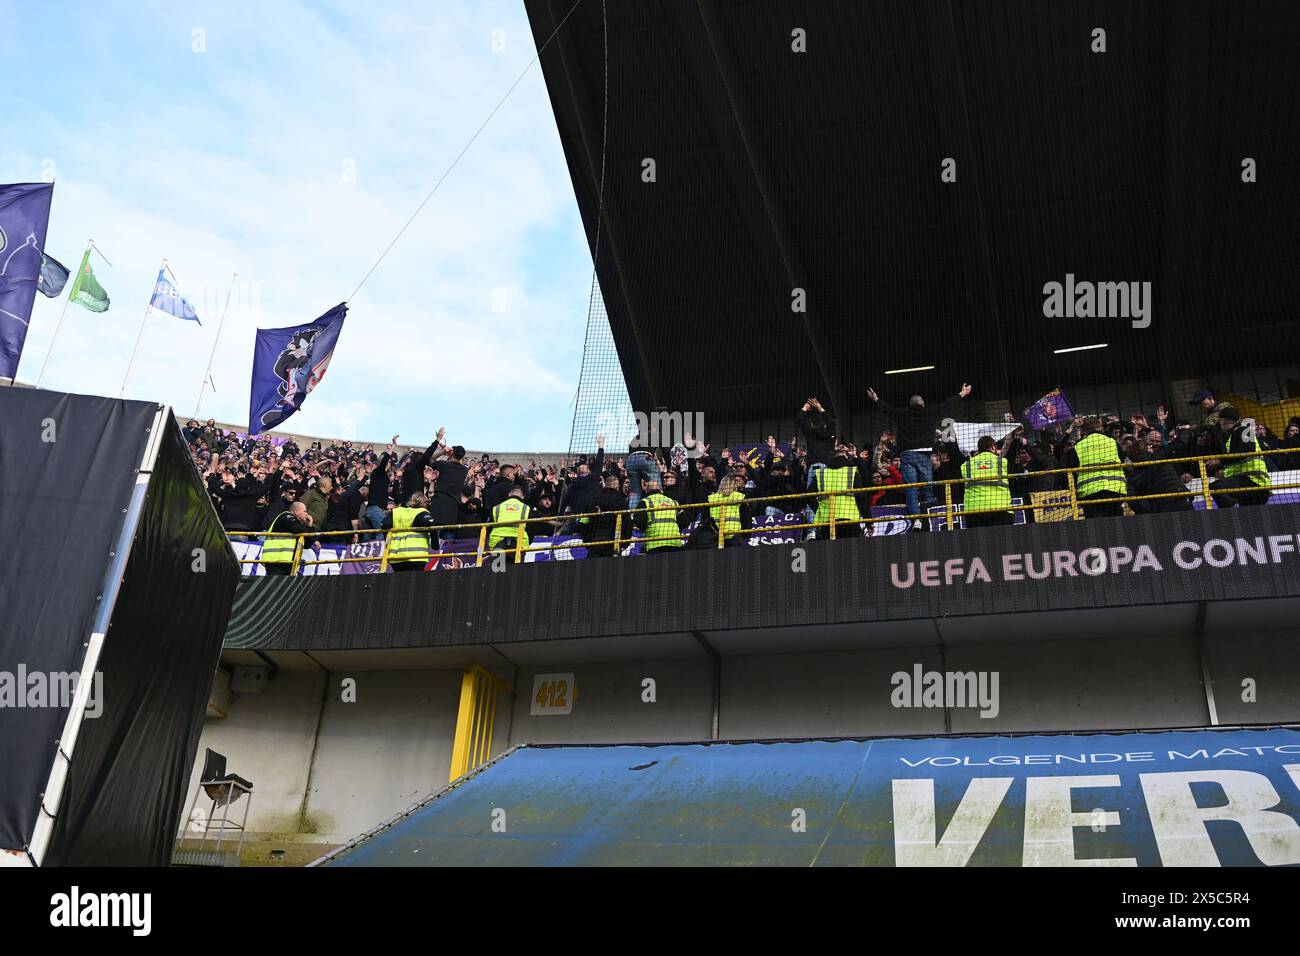 Supporters (Fiorentina) during the UEFA Europa Conference League match between Club Brugge 1-1 Fiorentina at Jan Breydel Stadium on May 8, 2024 in Bruges, Belgium. Credit: Maurizio Borsari/AFLO/Alamy Live News Stock Photo